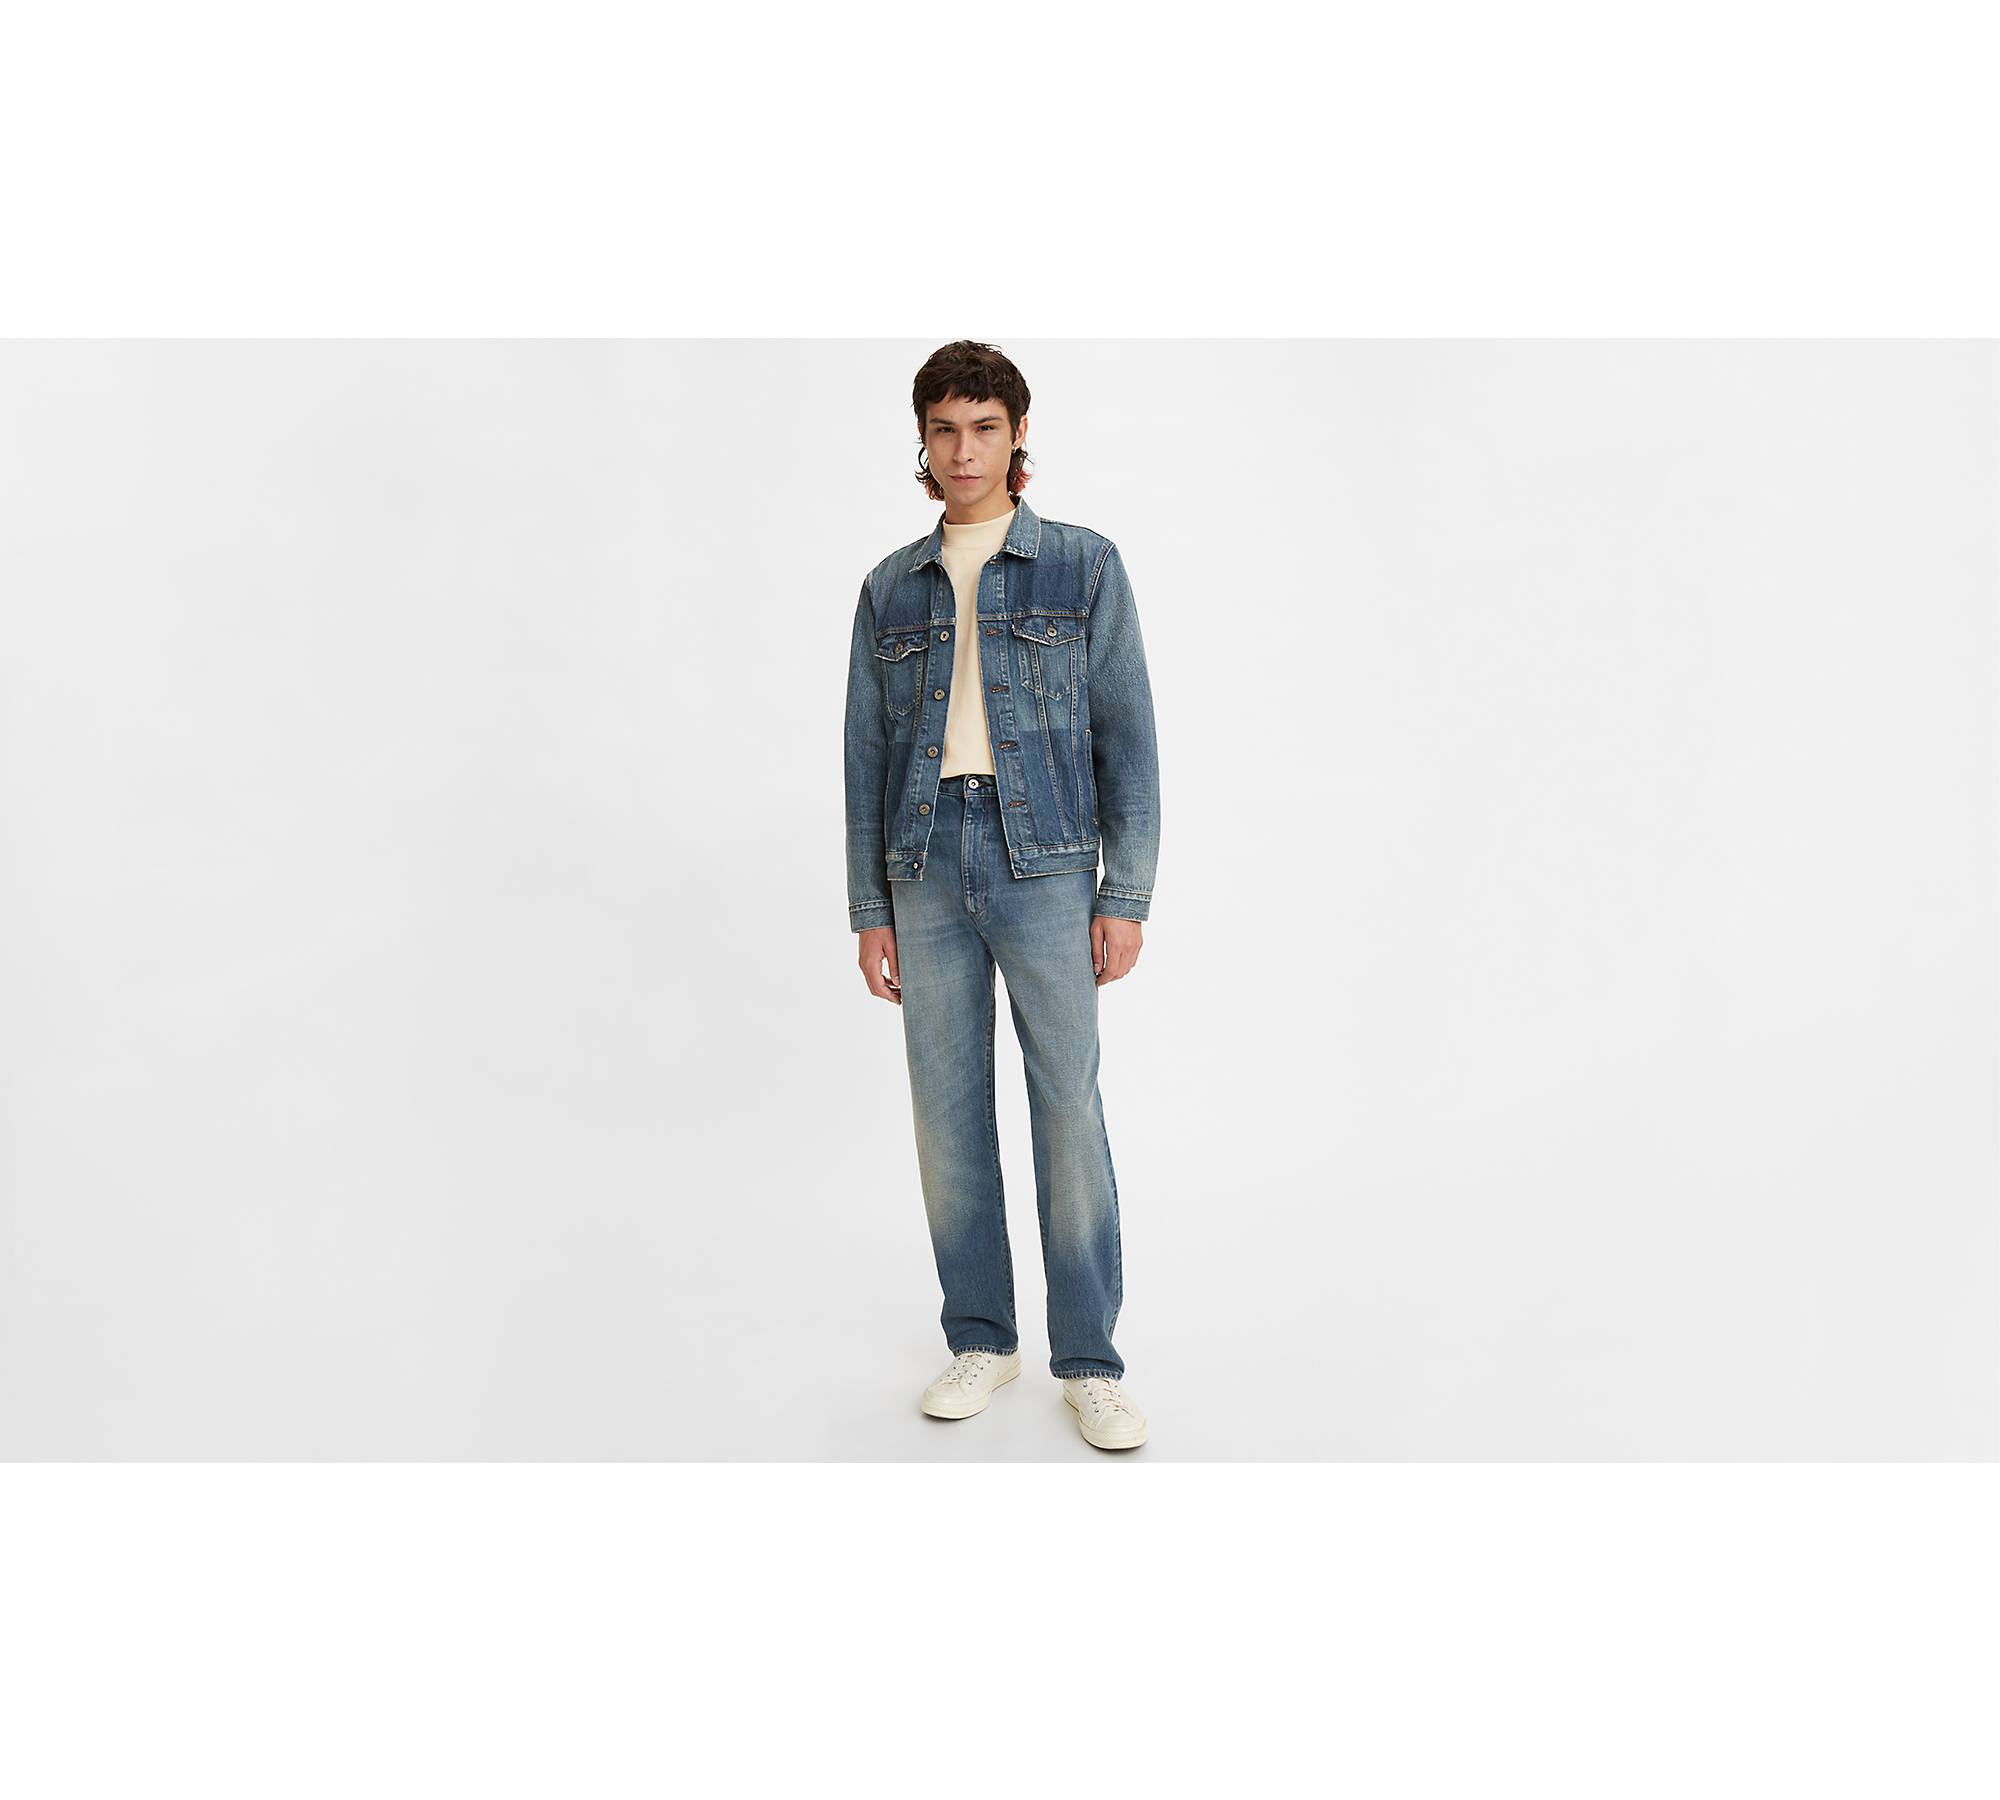 High Rise Straight Fit Men's Jeans - Dark Wash | Levi's® US